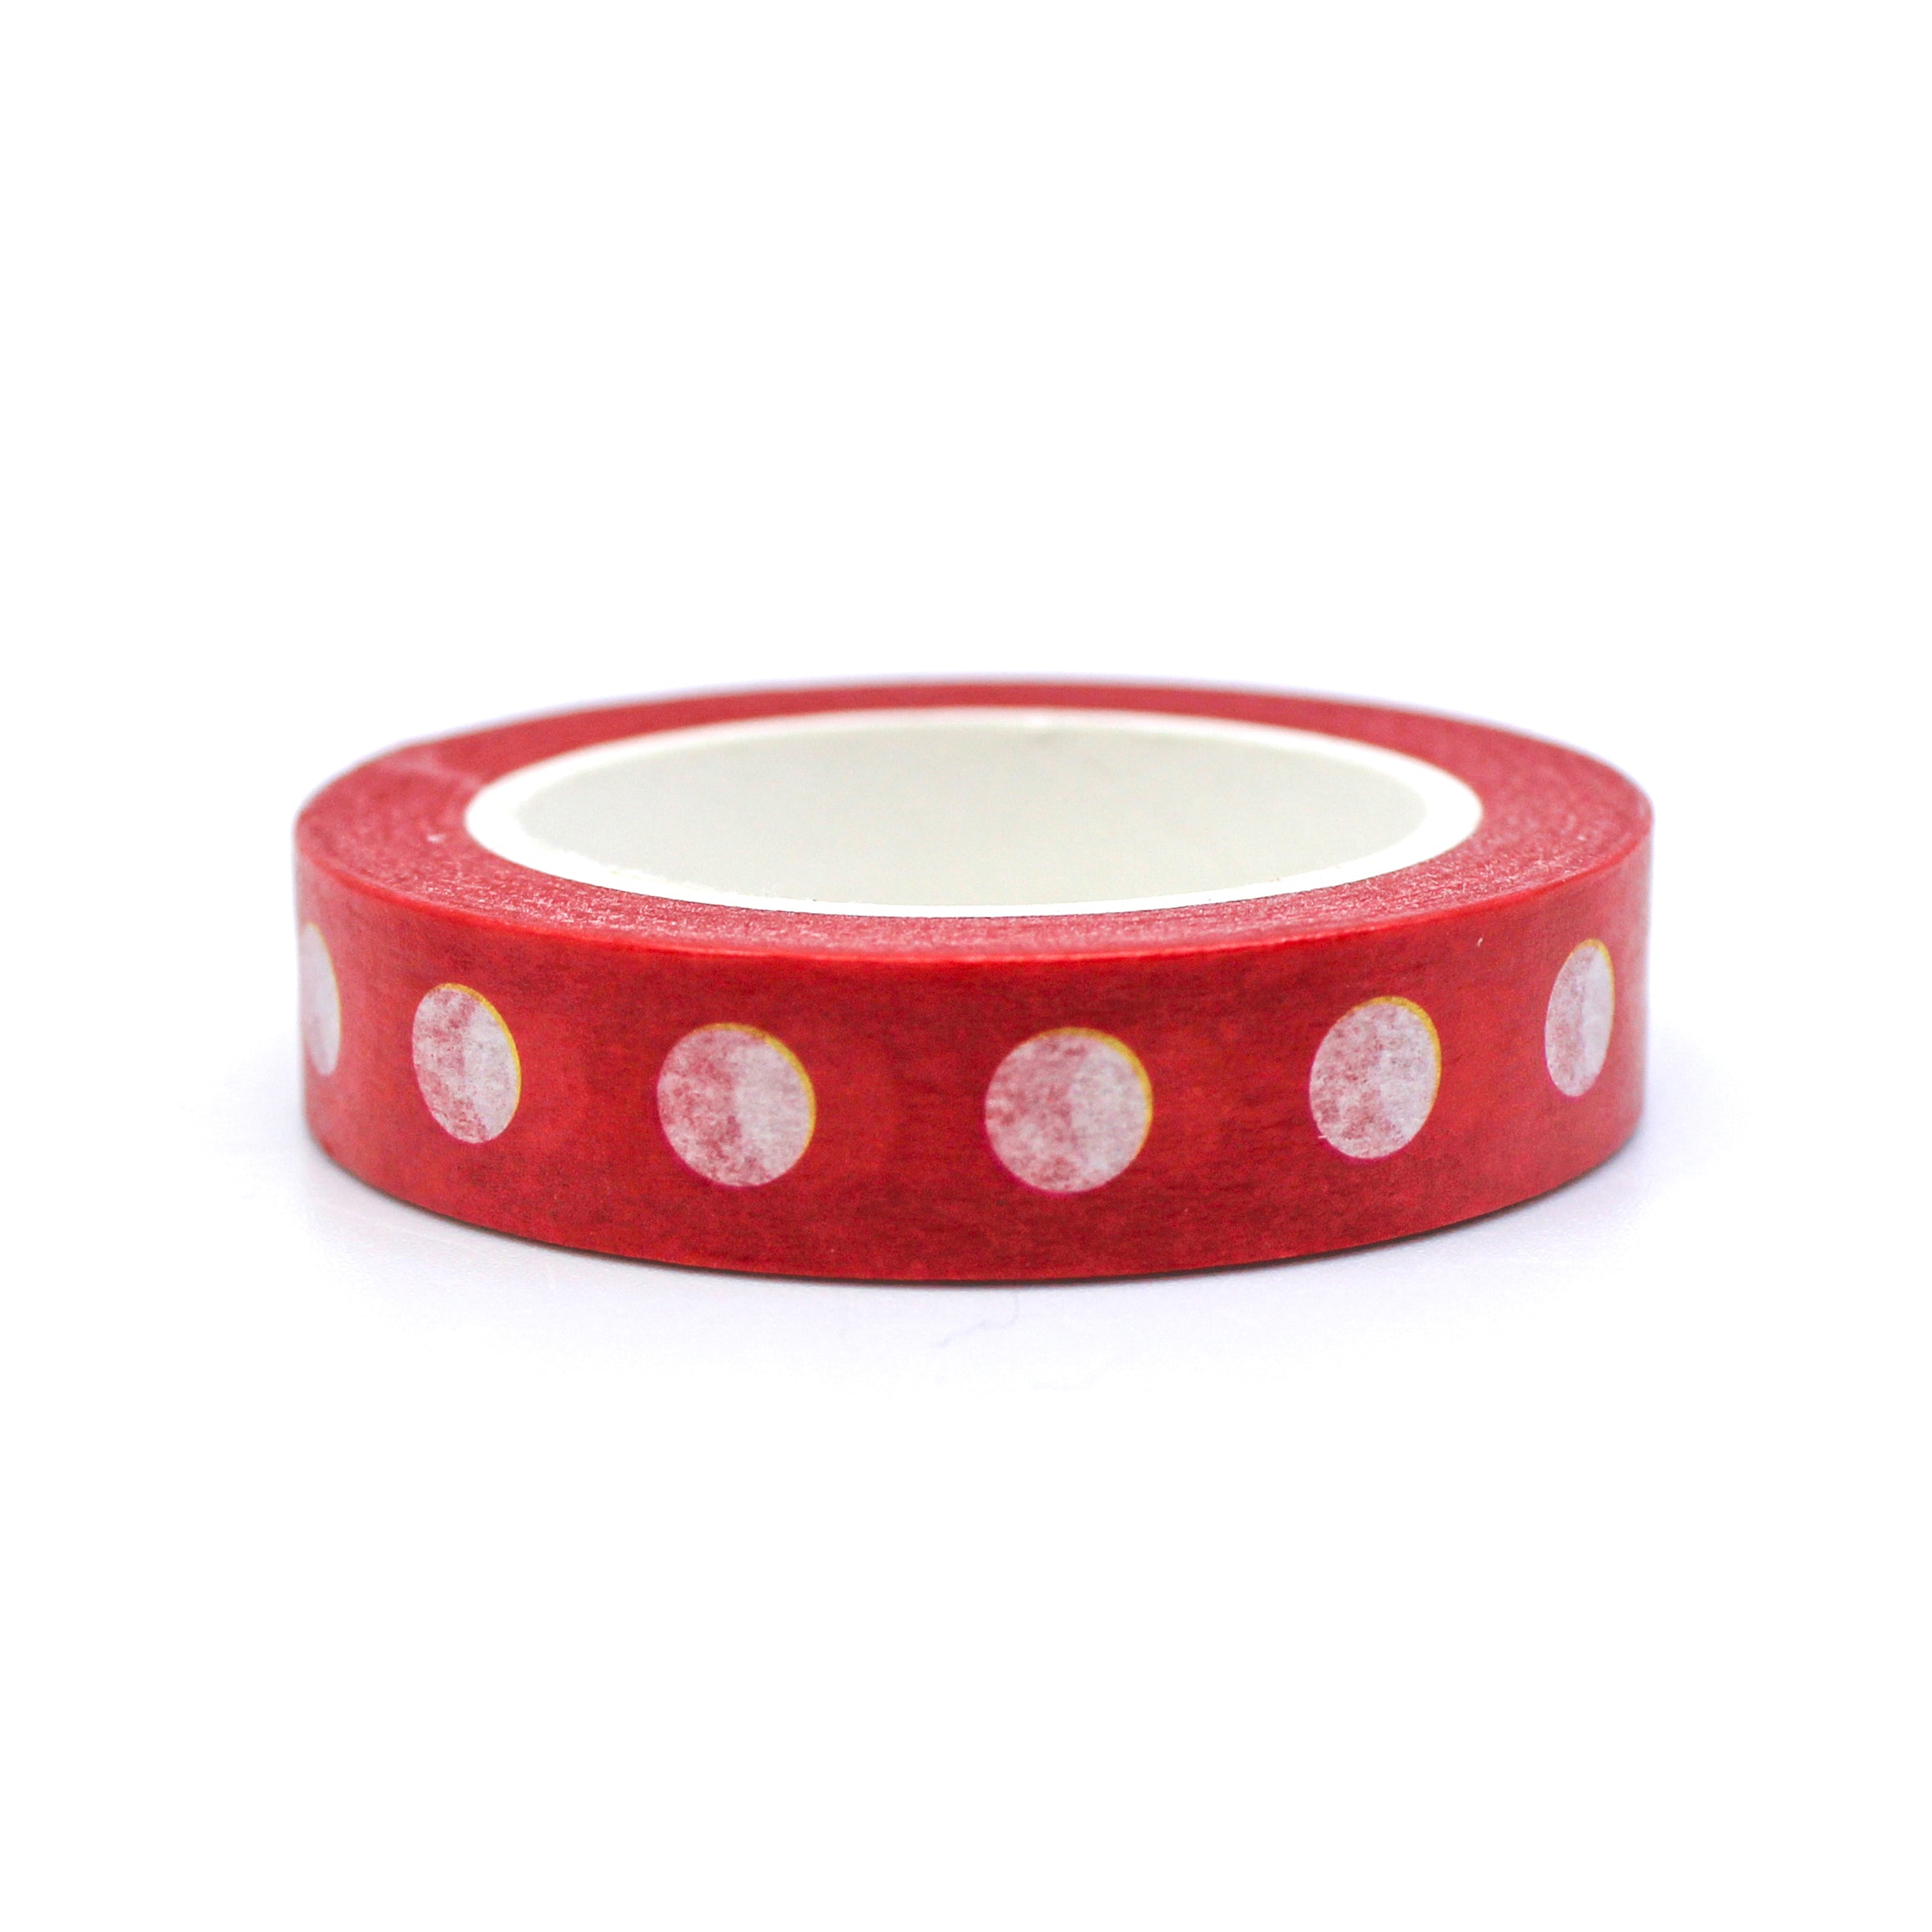 This is a cute Red Polka Dotted Thin Washi Tape from BBB Supplies Craft Shop.